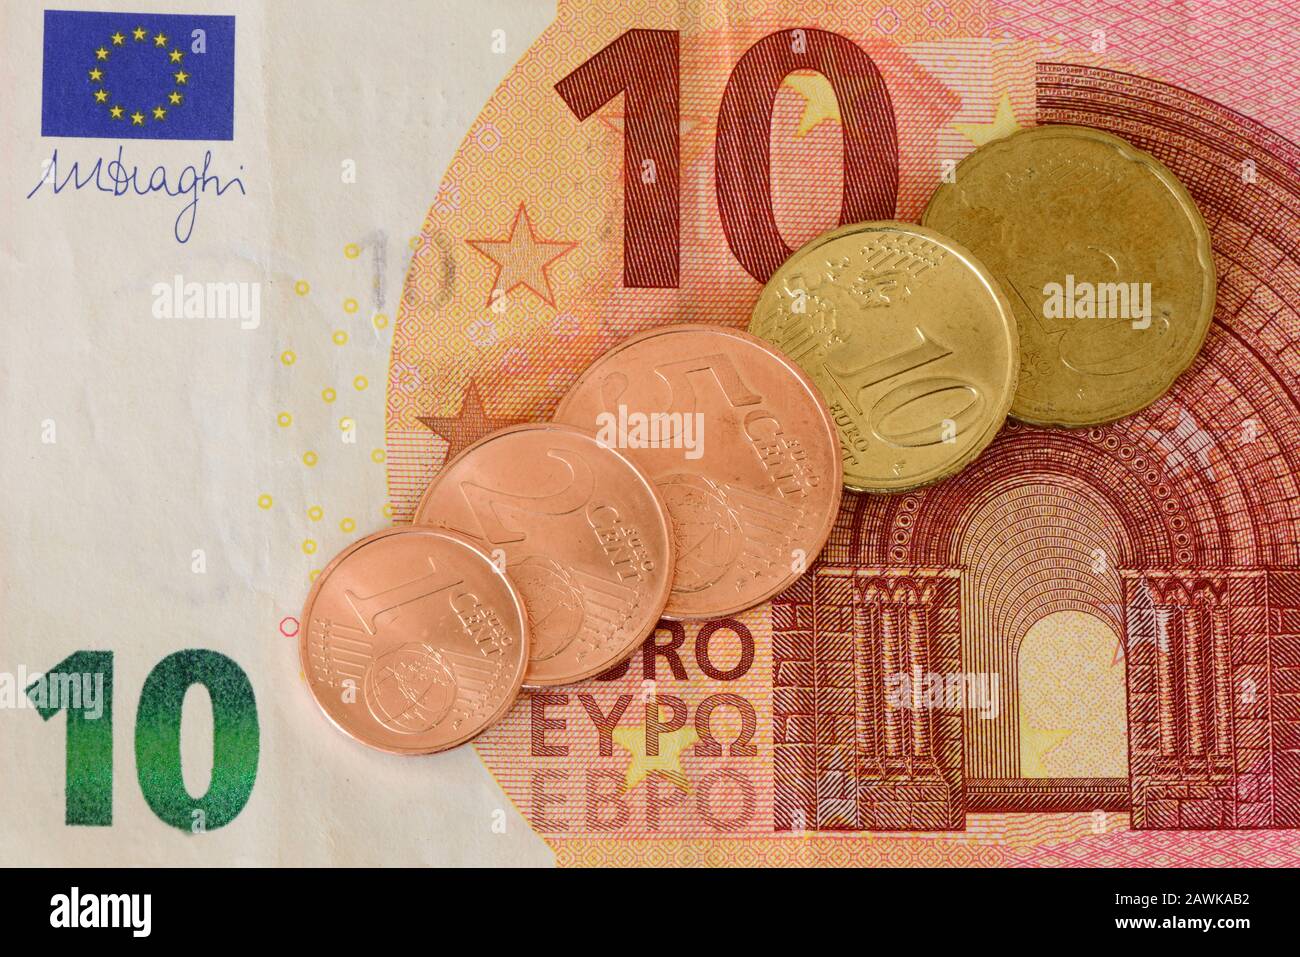 According to media reports, the new EU Commission   plans to abolish  cent coins. Stock Photo